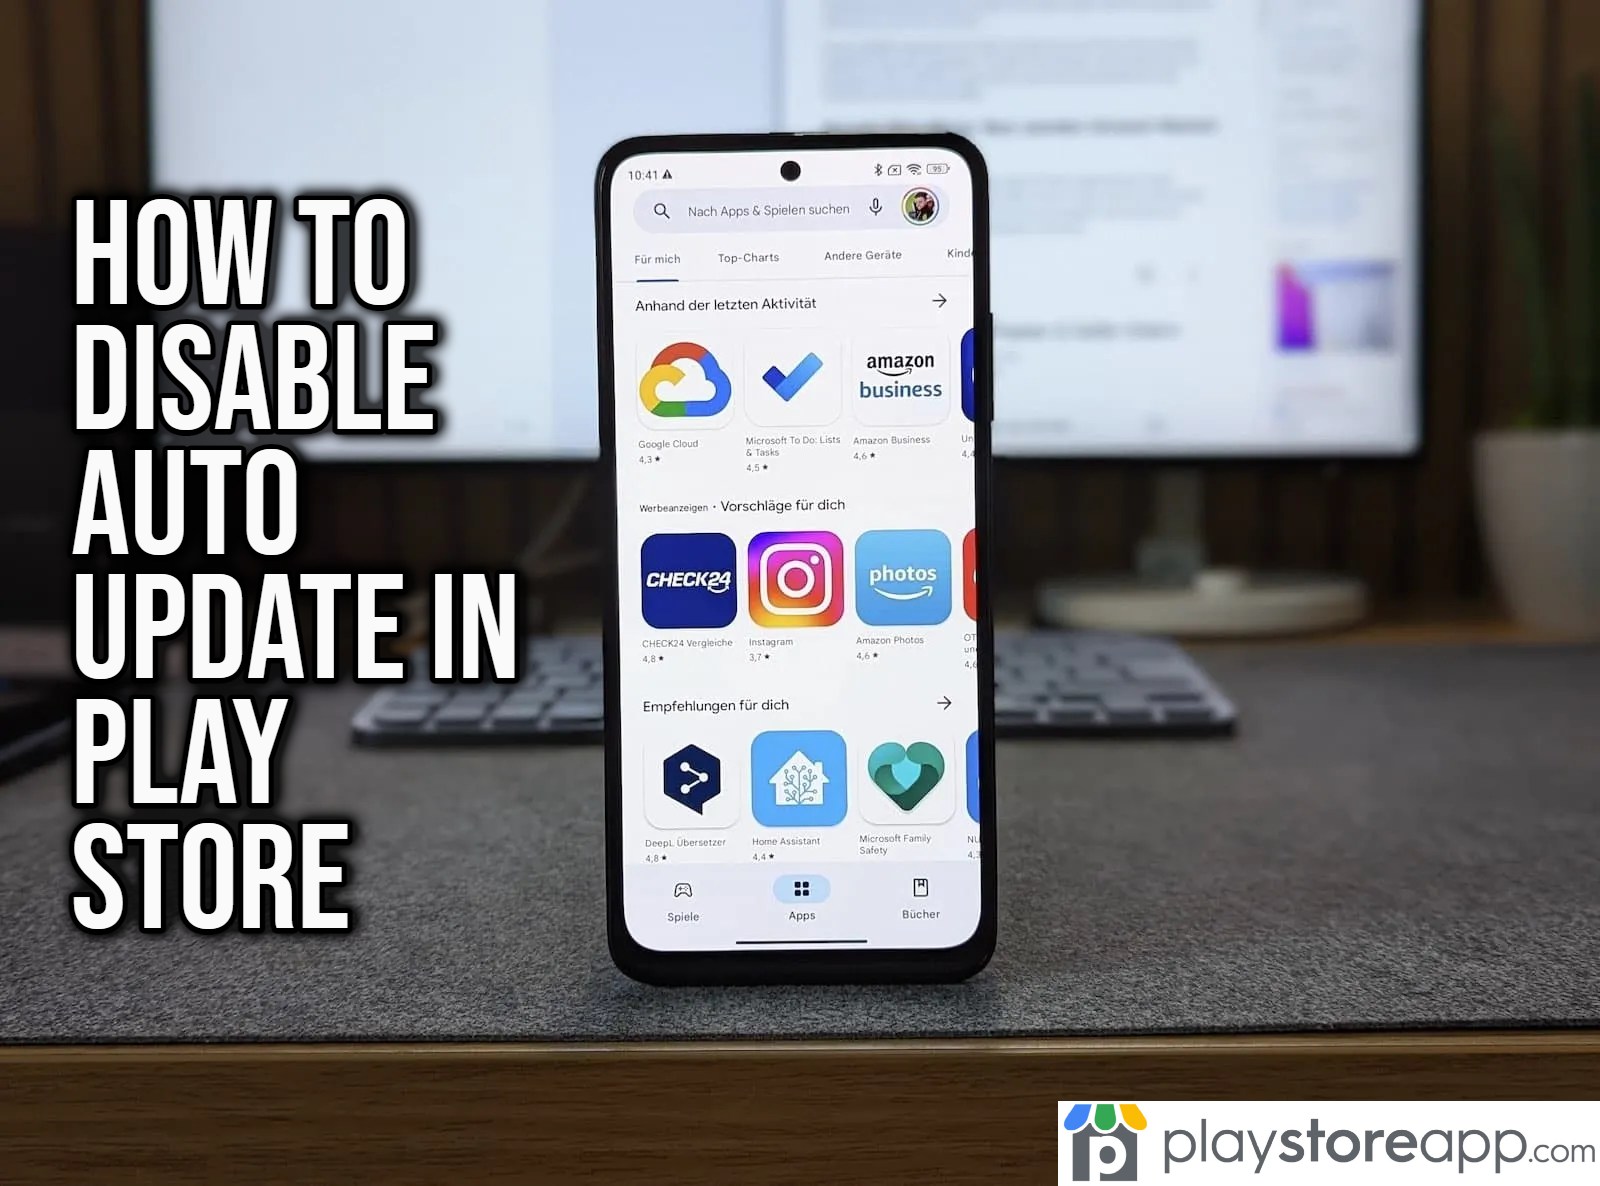 How to Disable Auto Update in Play Store